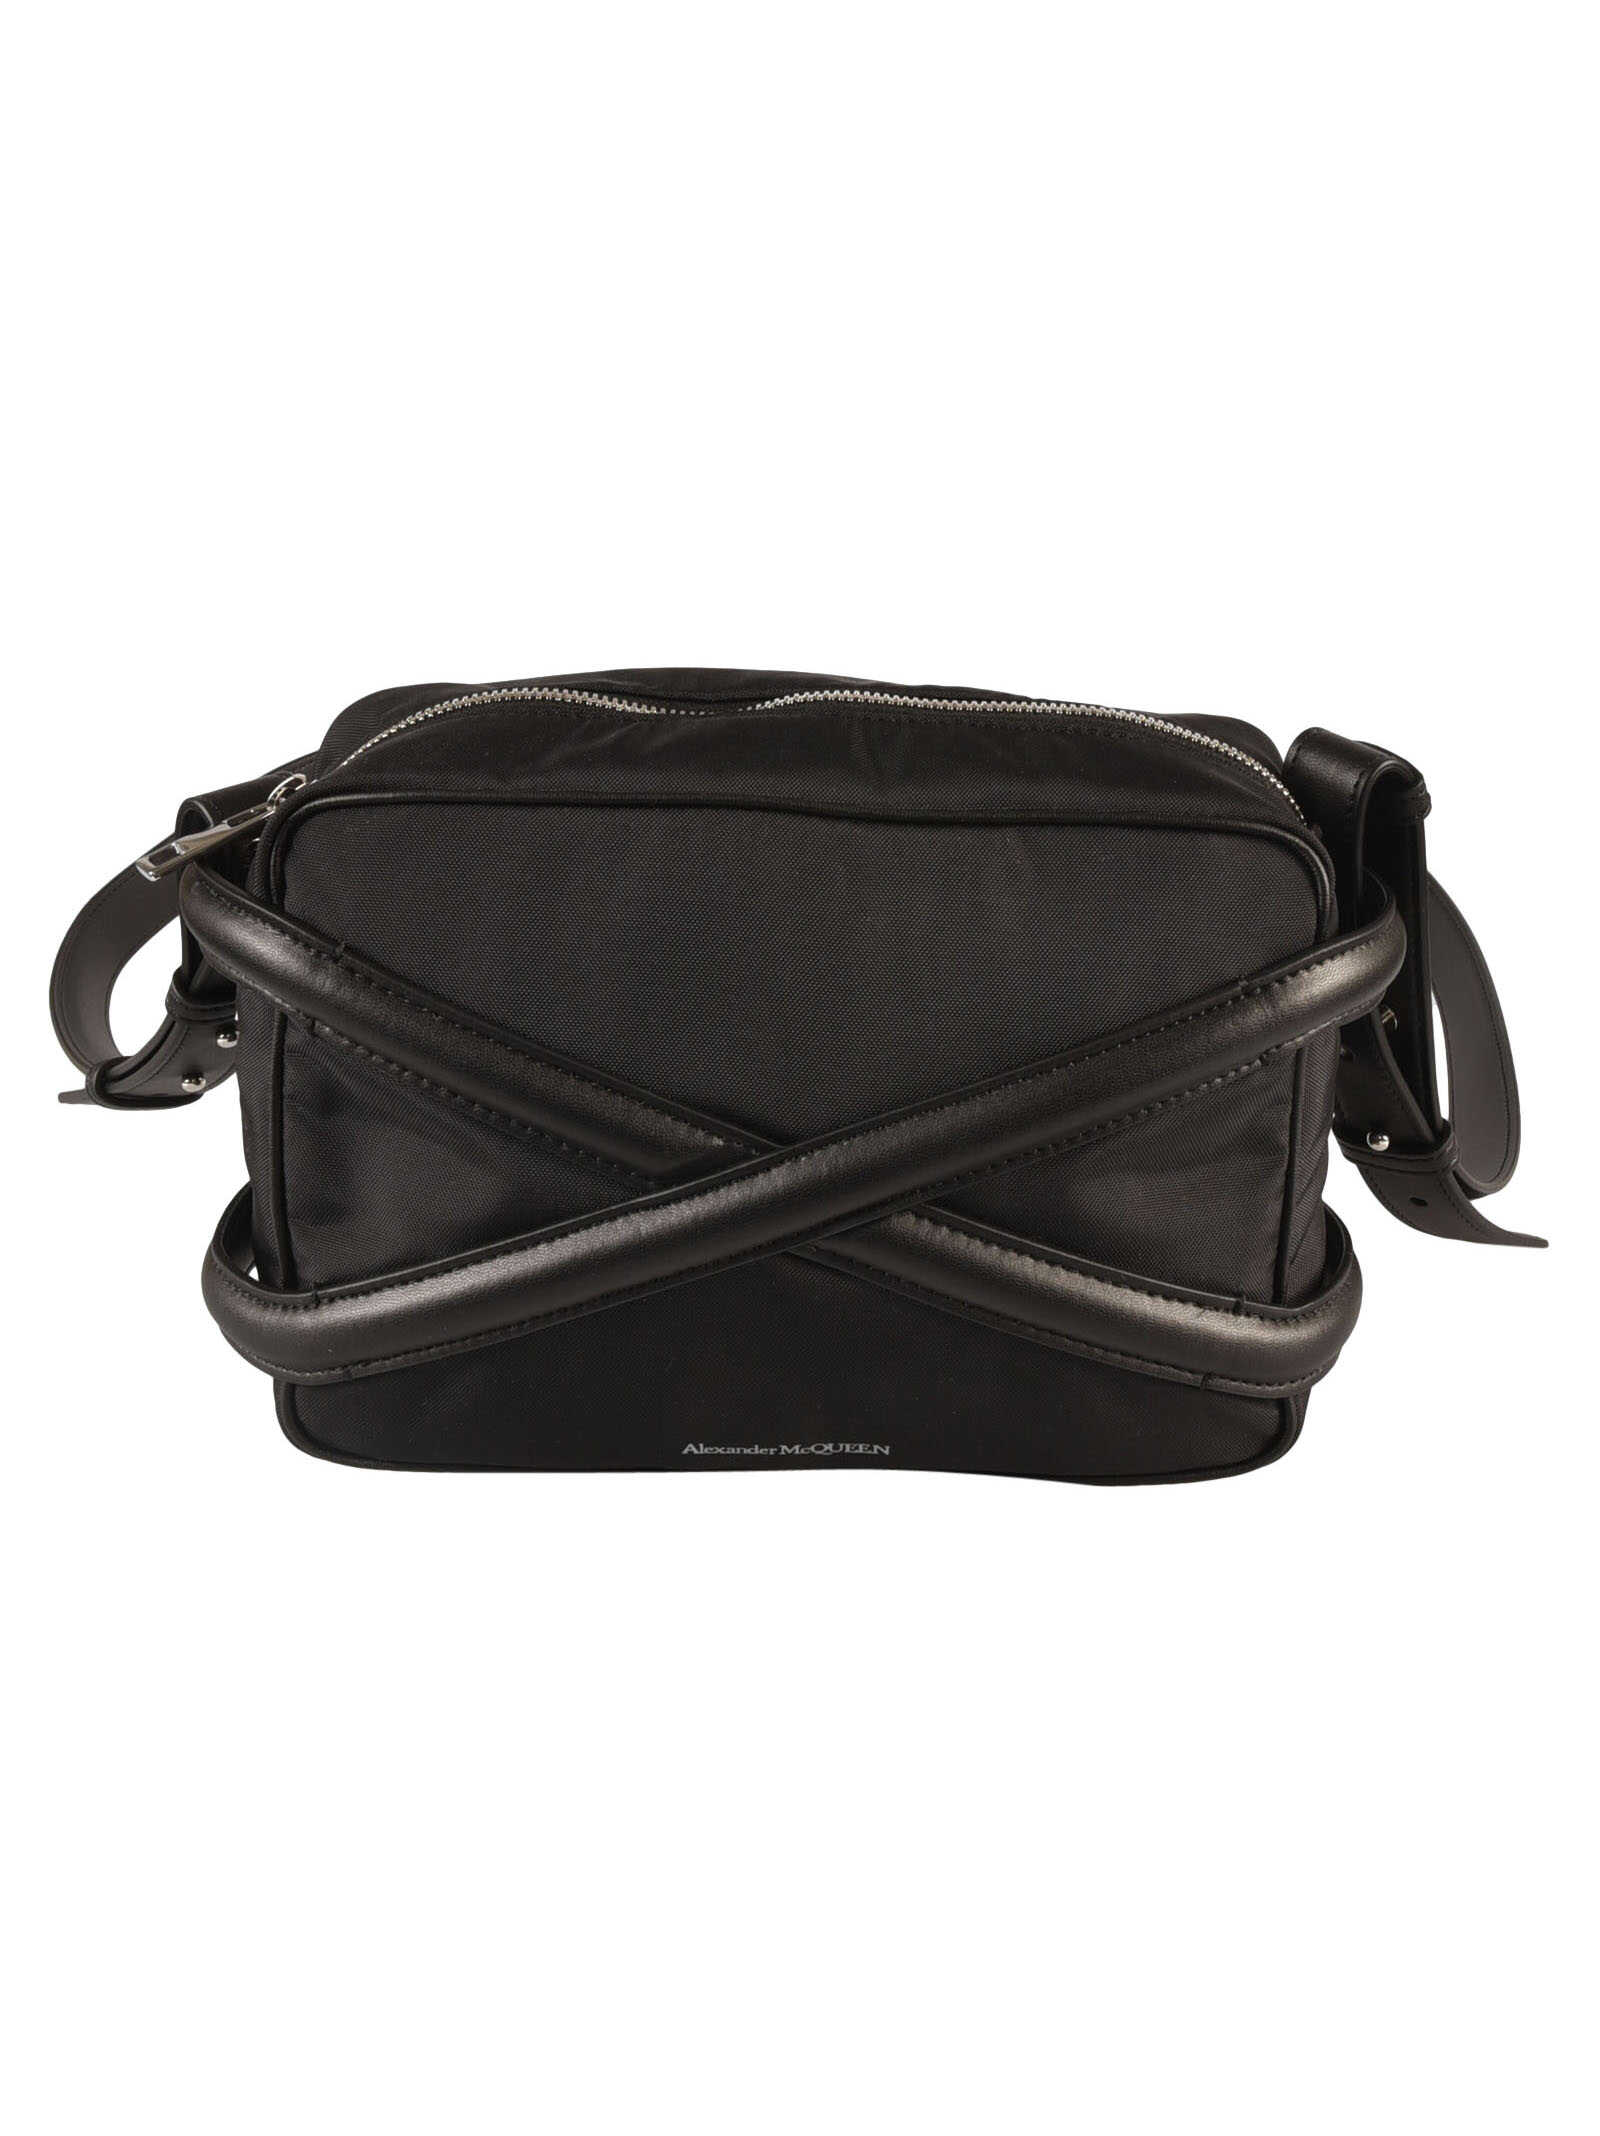 Alexander McQueen Nylon and leather shoulder bag with frontal logo Black